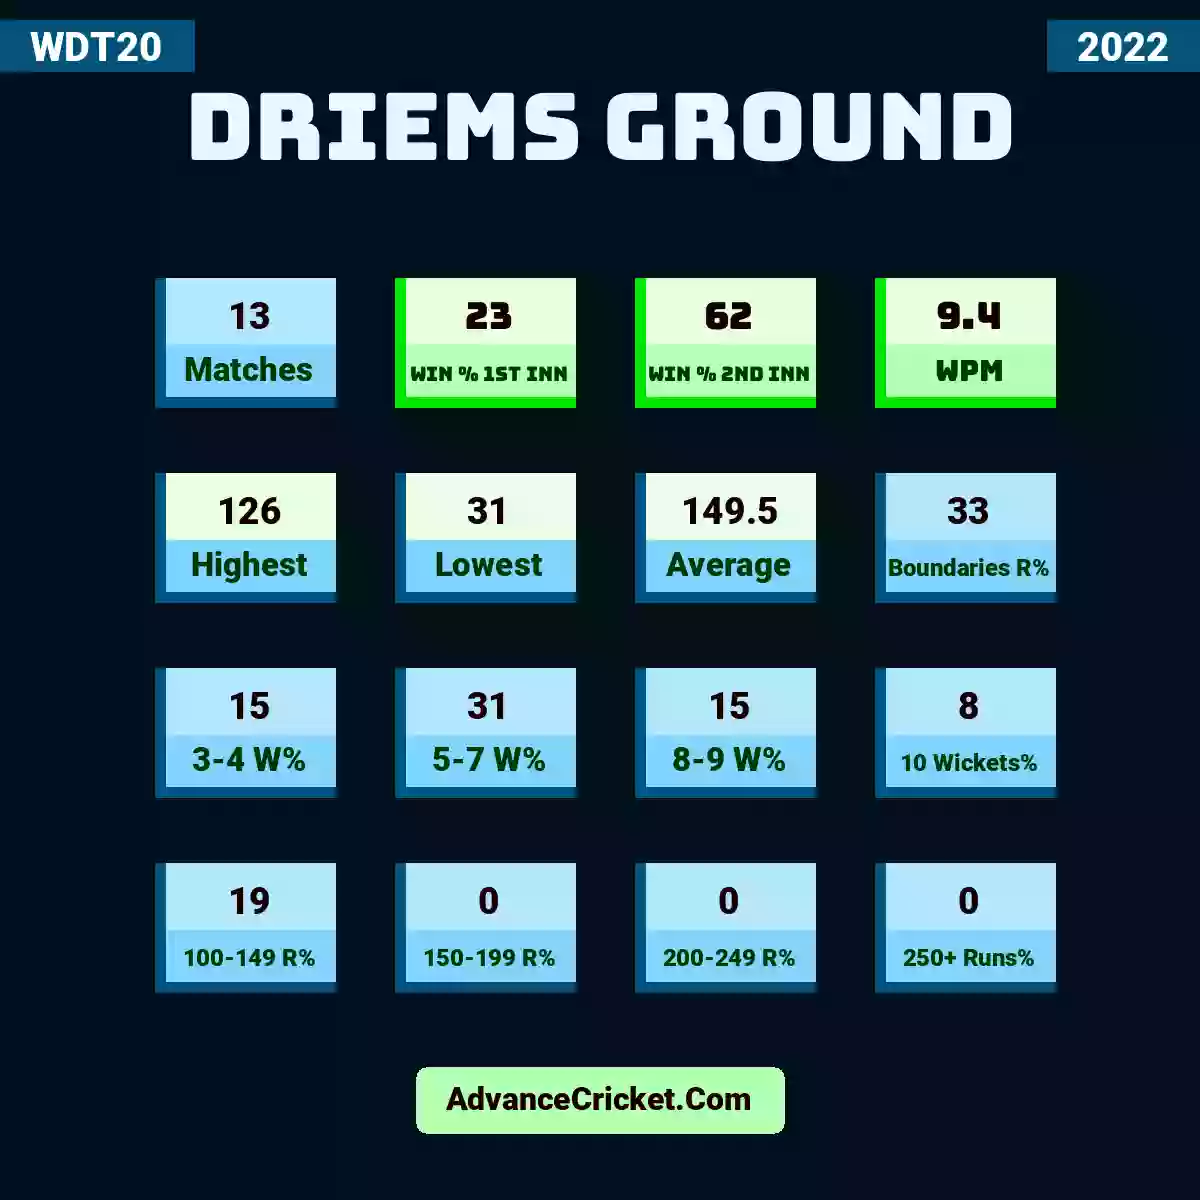 Image showing DRIEMS Ground with Matches: 13, Win % 1st Inn: 23, Win % 2nd Inn: 62, WPM: 9.4, Highest: 126, Lowest: 31, Average: 149.5, Boundaries R%: 33, 3-4 W%: 15, 5-7 W%: 31, 8-9 W%: 15, 10 Wickets%: 8, 100-149 R%: 19, 150-199 R%: 0, 200-249 R%: 0, 250+ Runs%: 0.